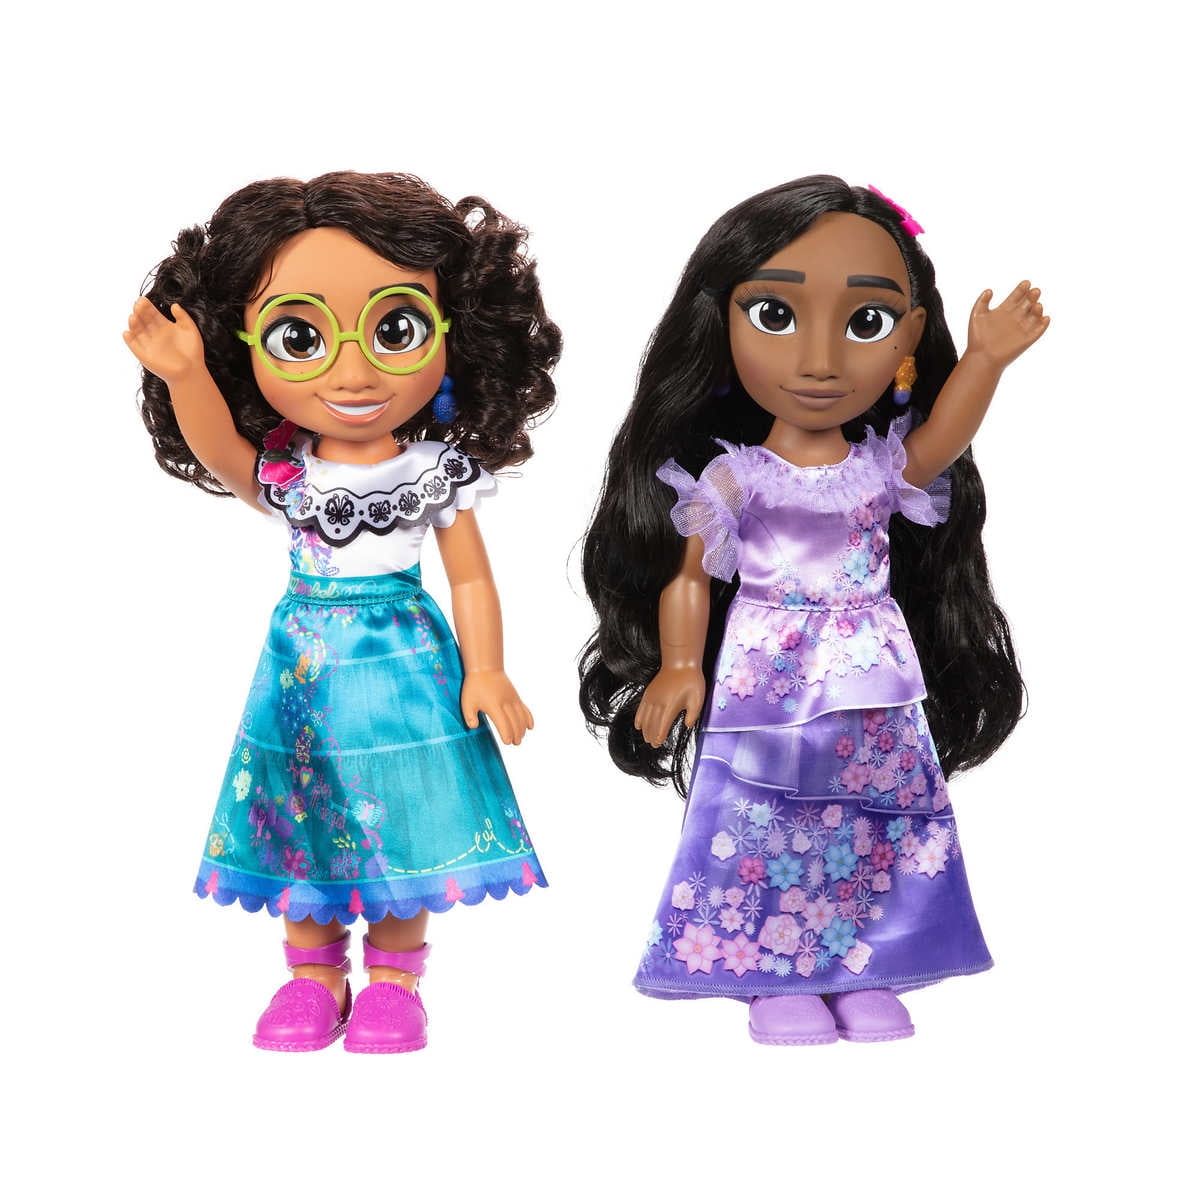 Disney Encanto Mirabel and Isabela Fashion Doll 14 In Gift Set New In Box